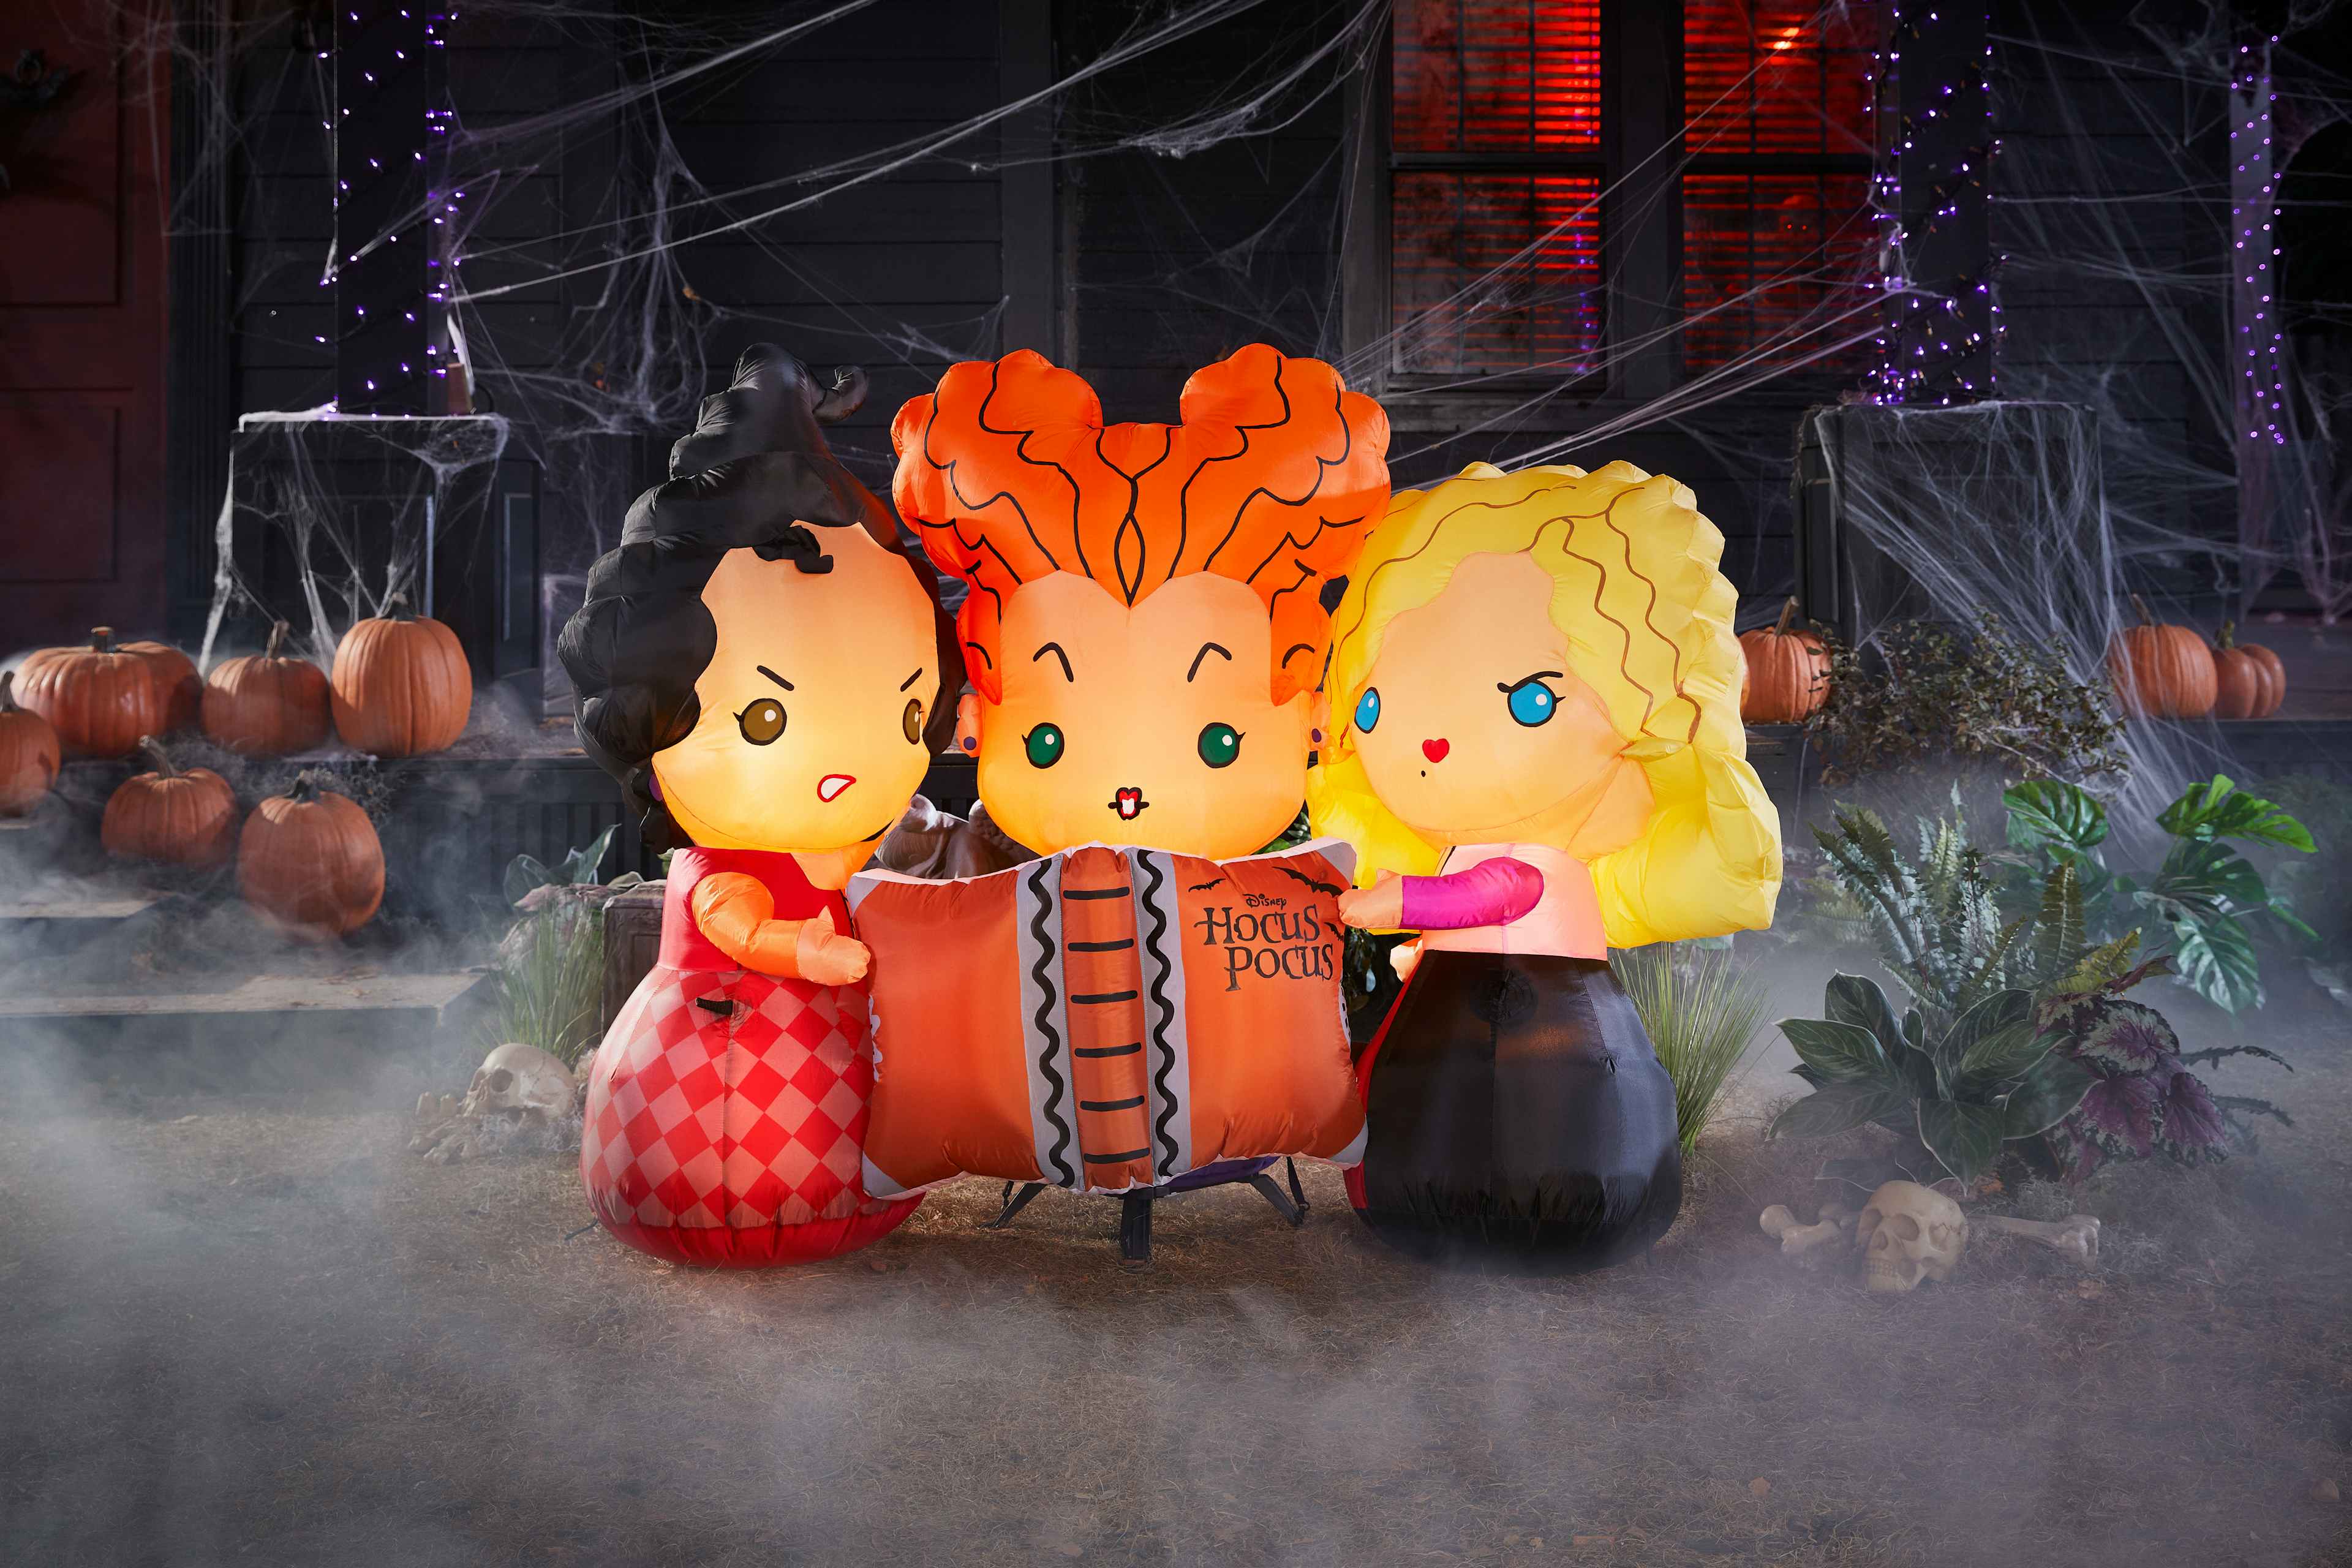 The Sanderson Sisters as Halloween inflatables.